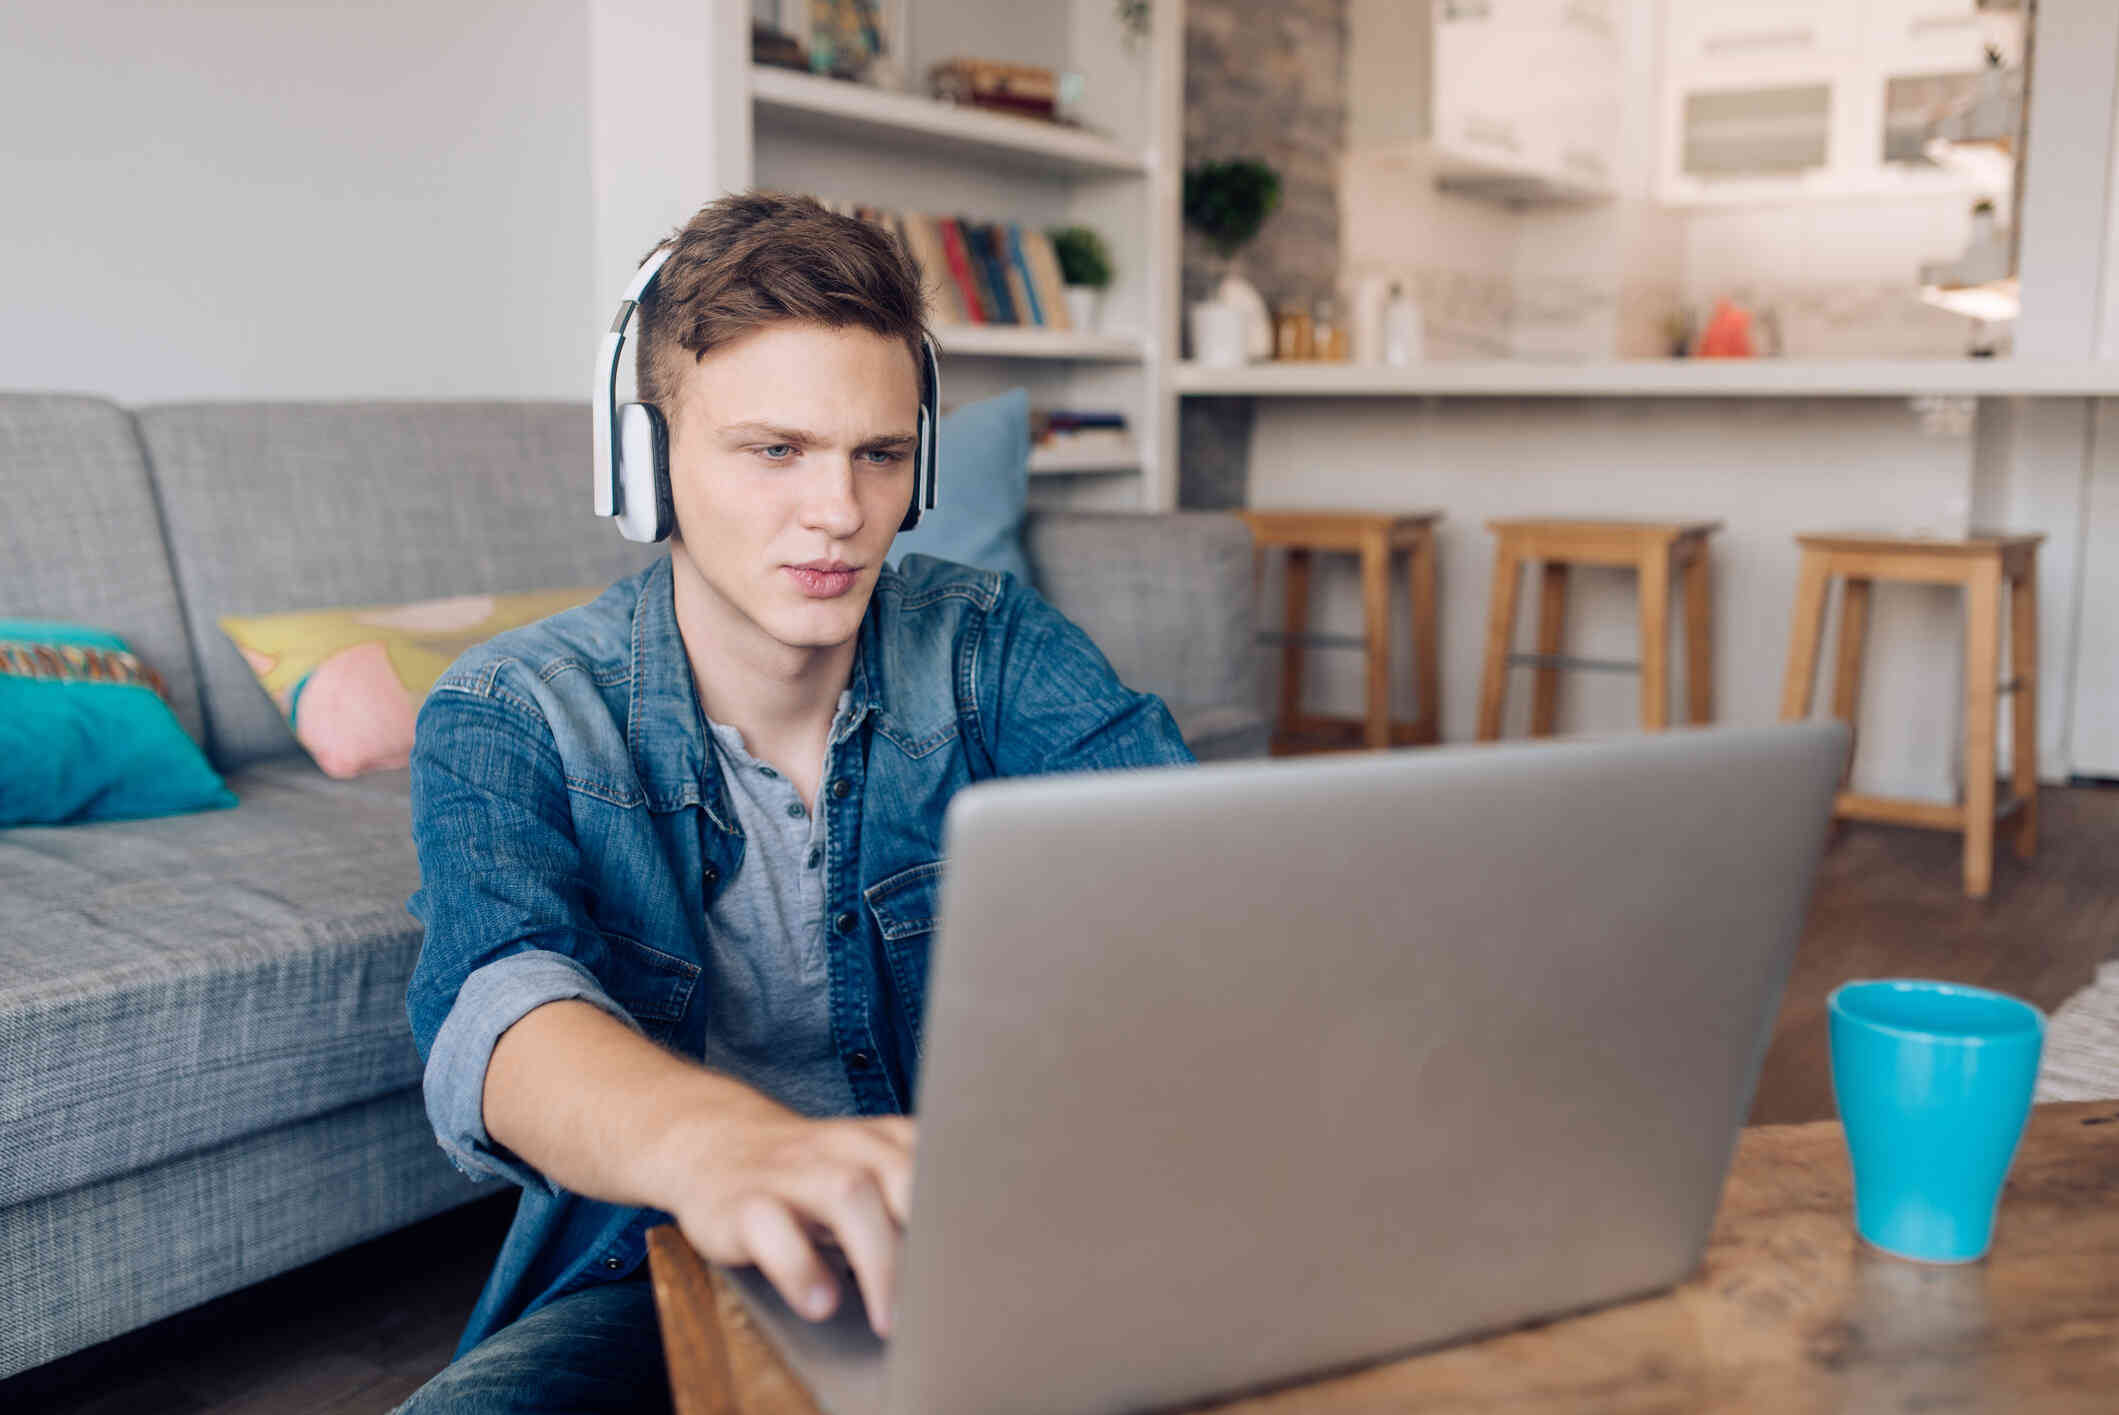 A teen boy wearing a blue jean shirt and headphones sits at a table with his laptop open infront of him and looks at the screen with a focused expression.